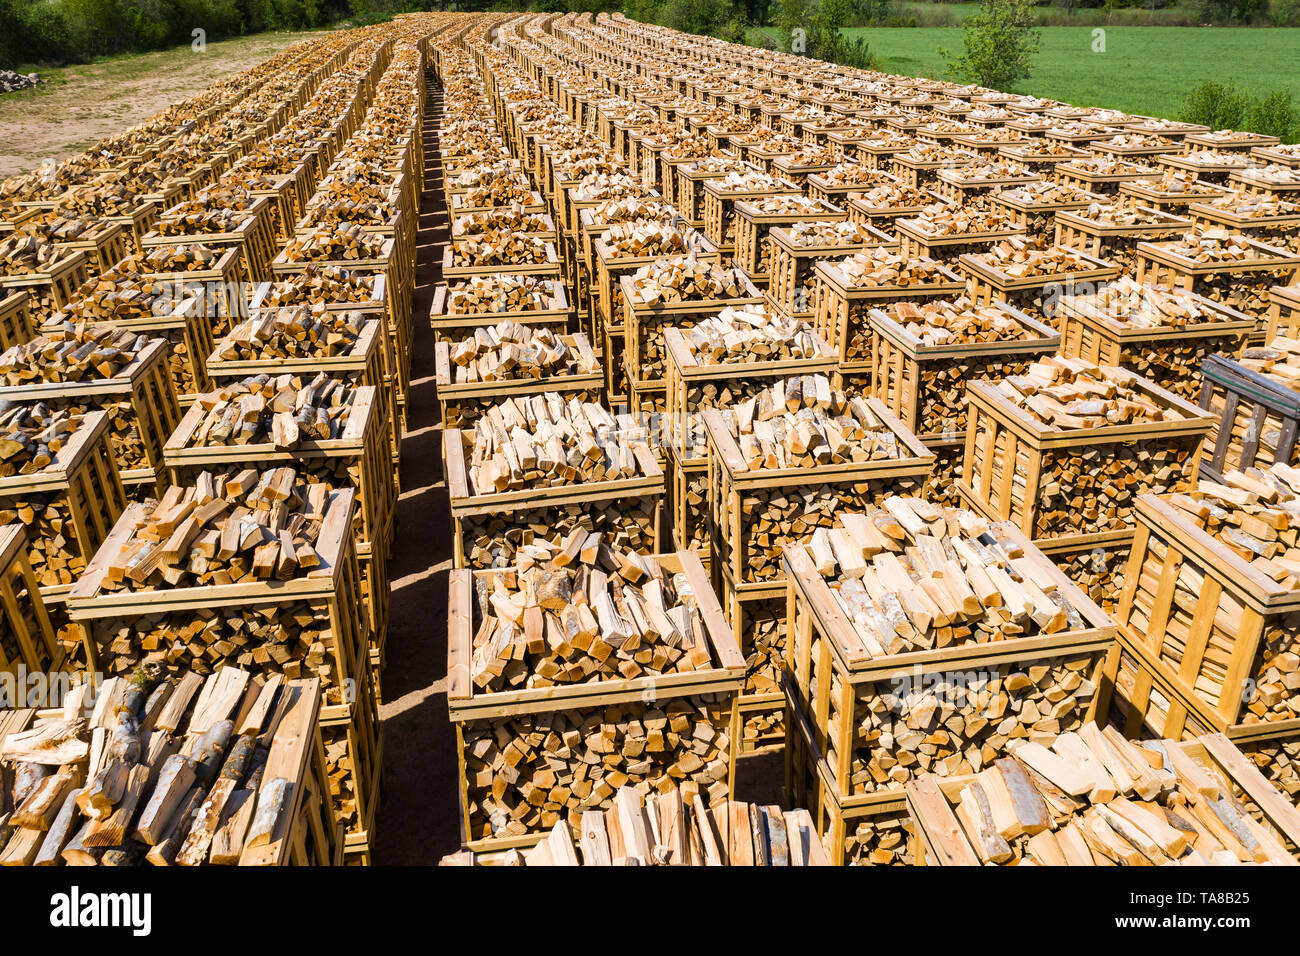 Rows of firewood stacked on pallets ready for transport. Part of surrounding landscape visible. Stock Photo